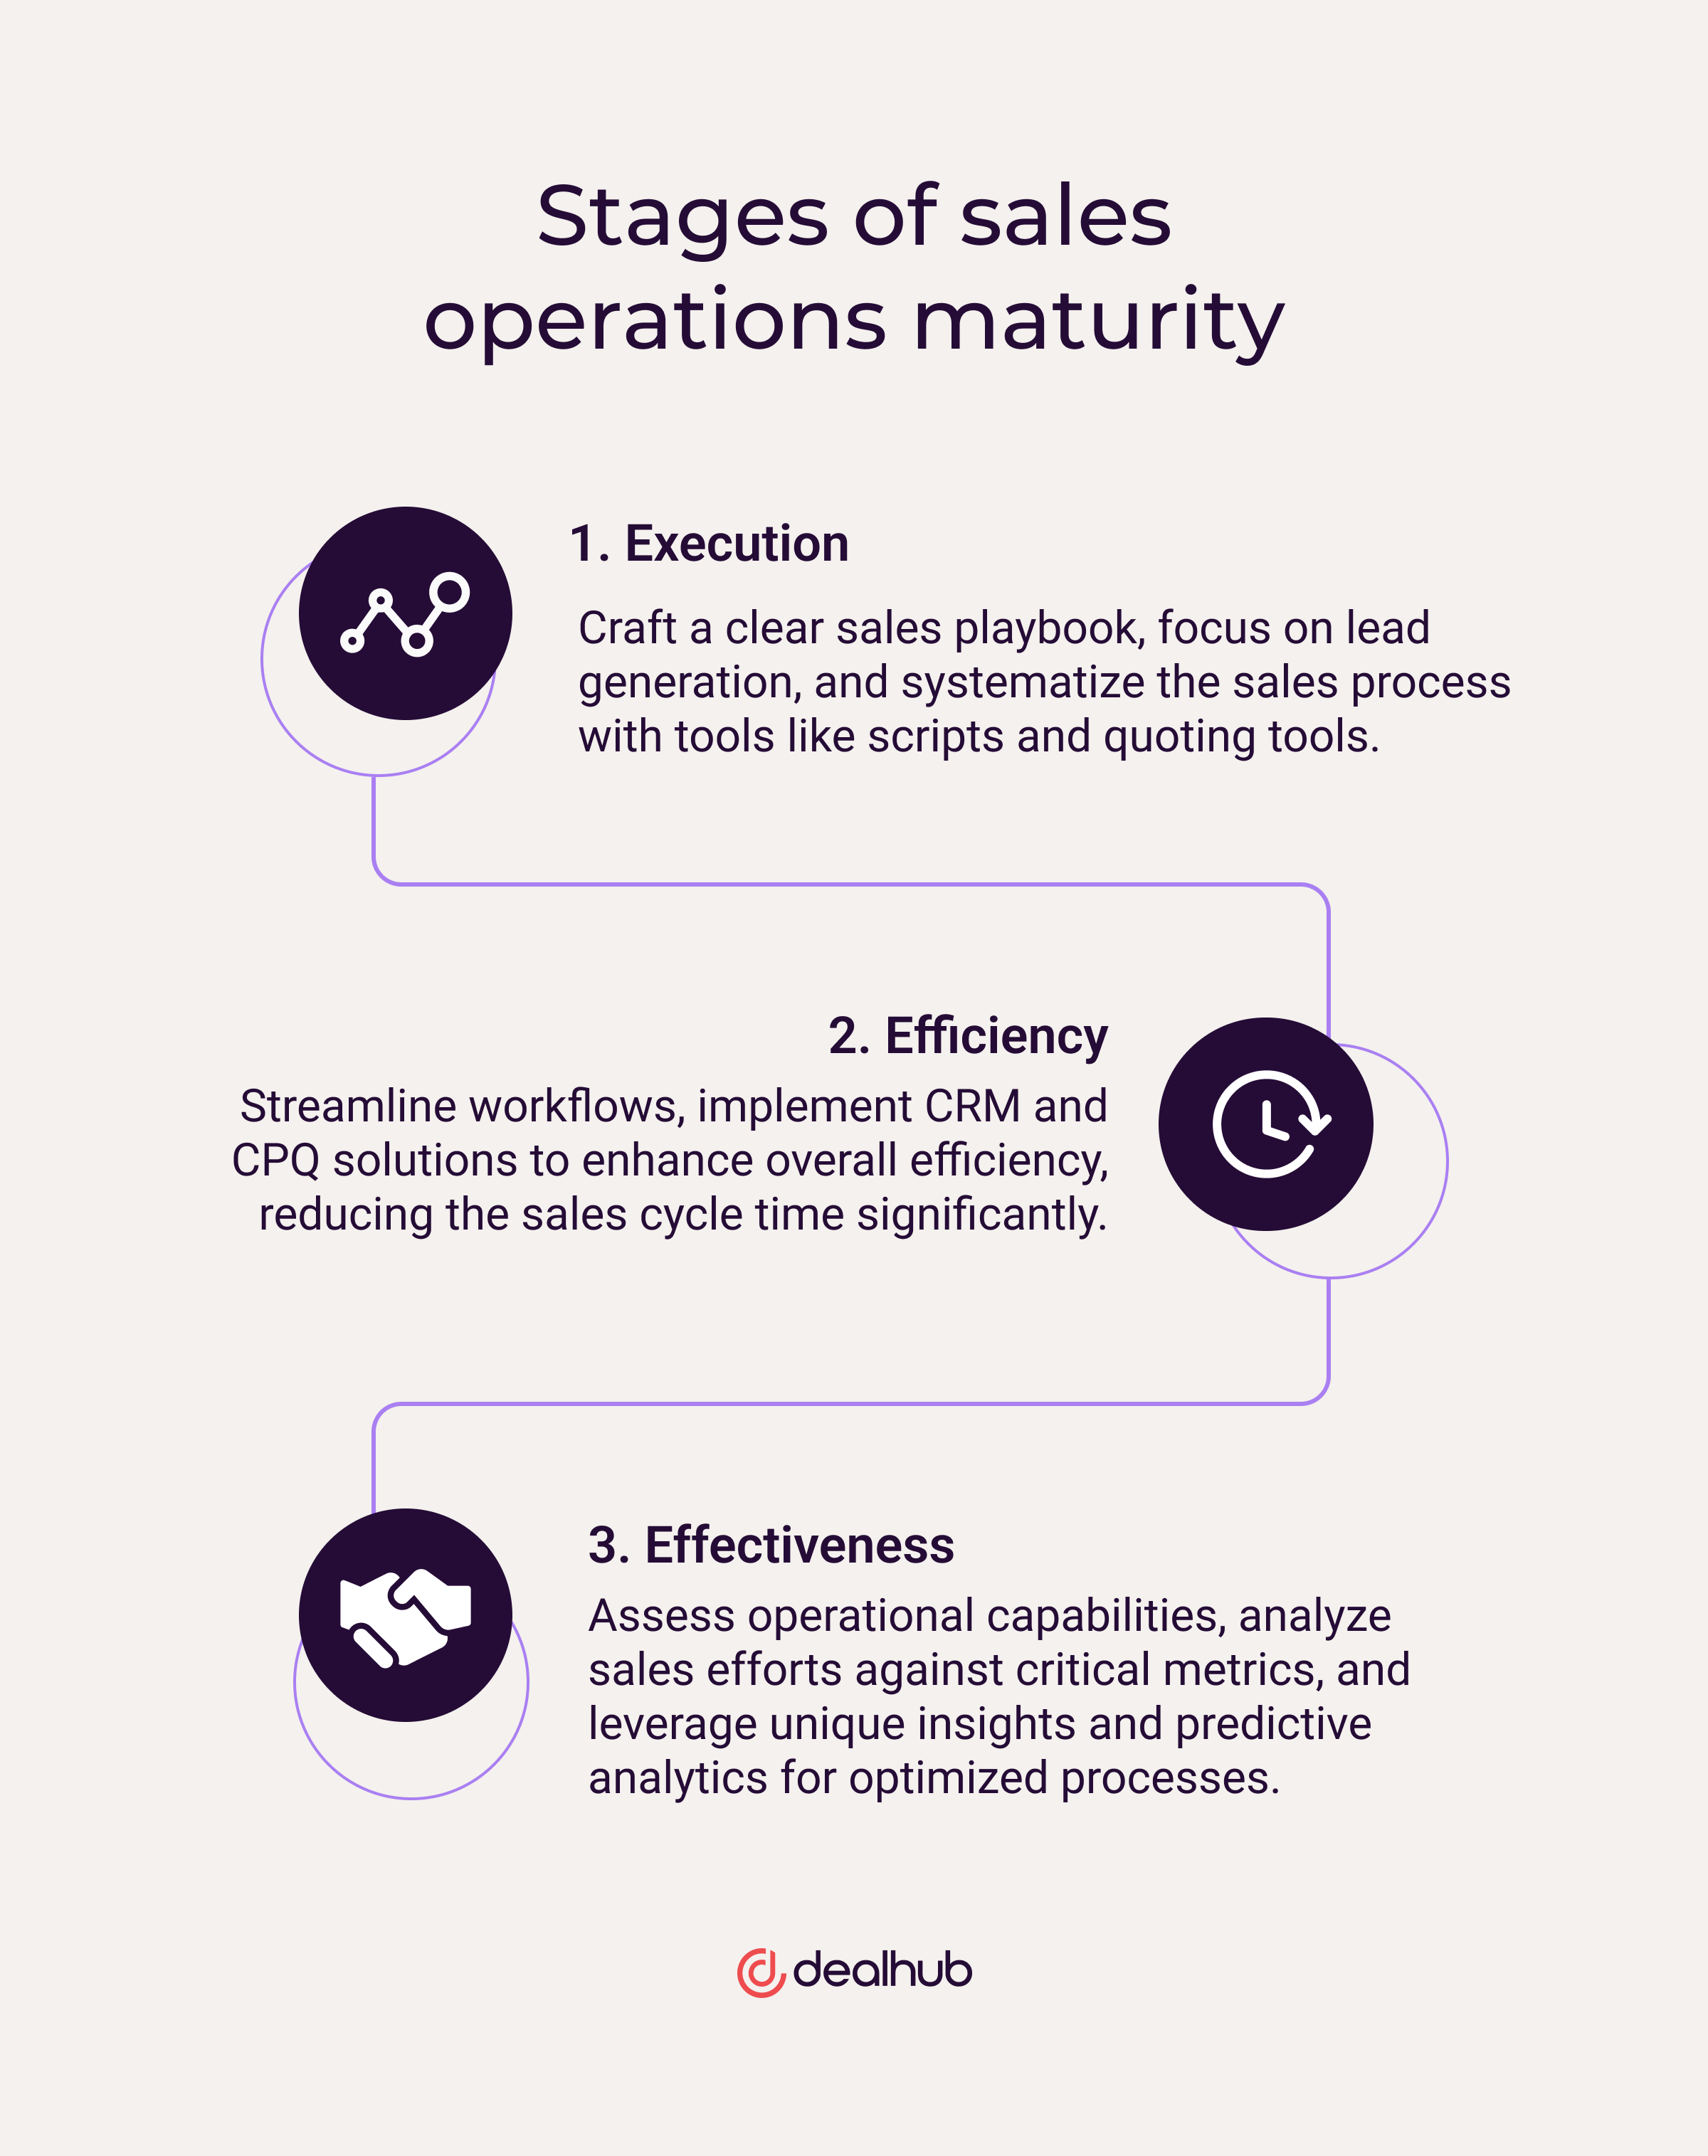 Stages of sales operations maturity